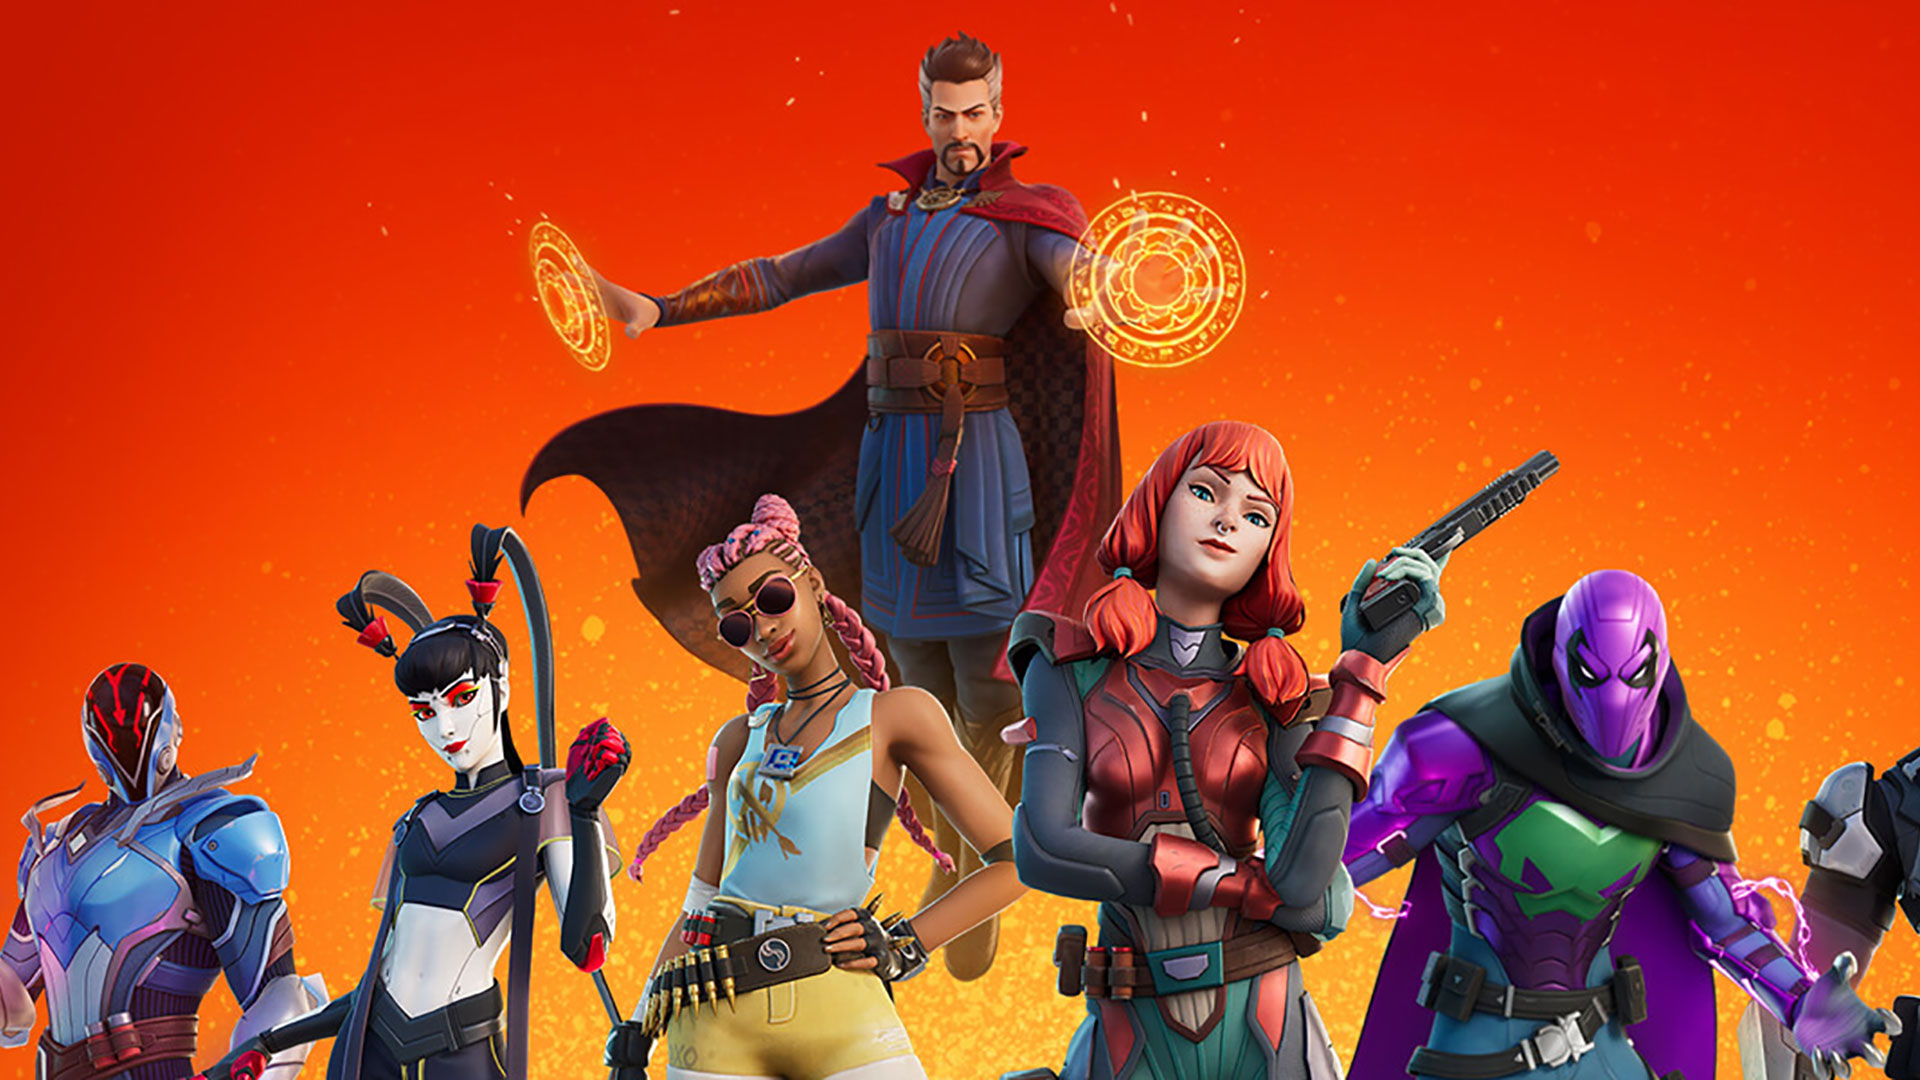 the character line-up for Fortnite Season 2